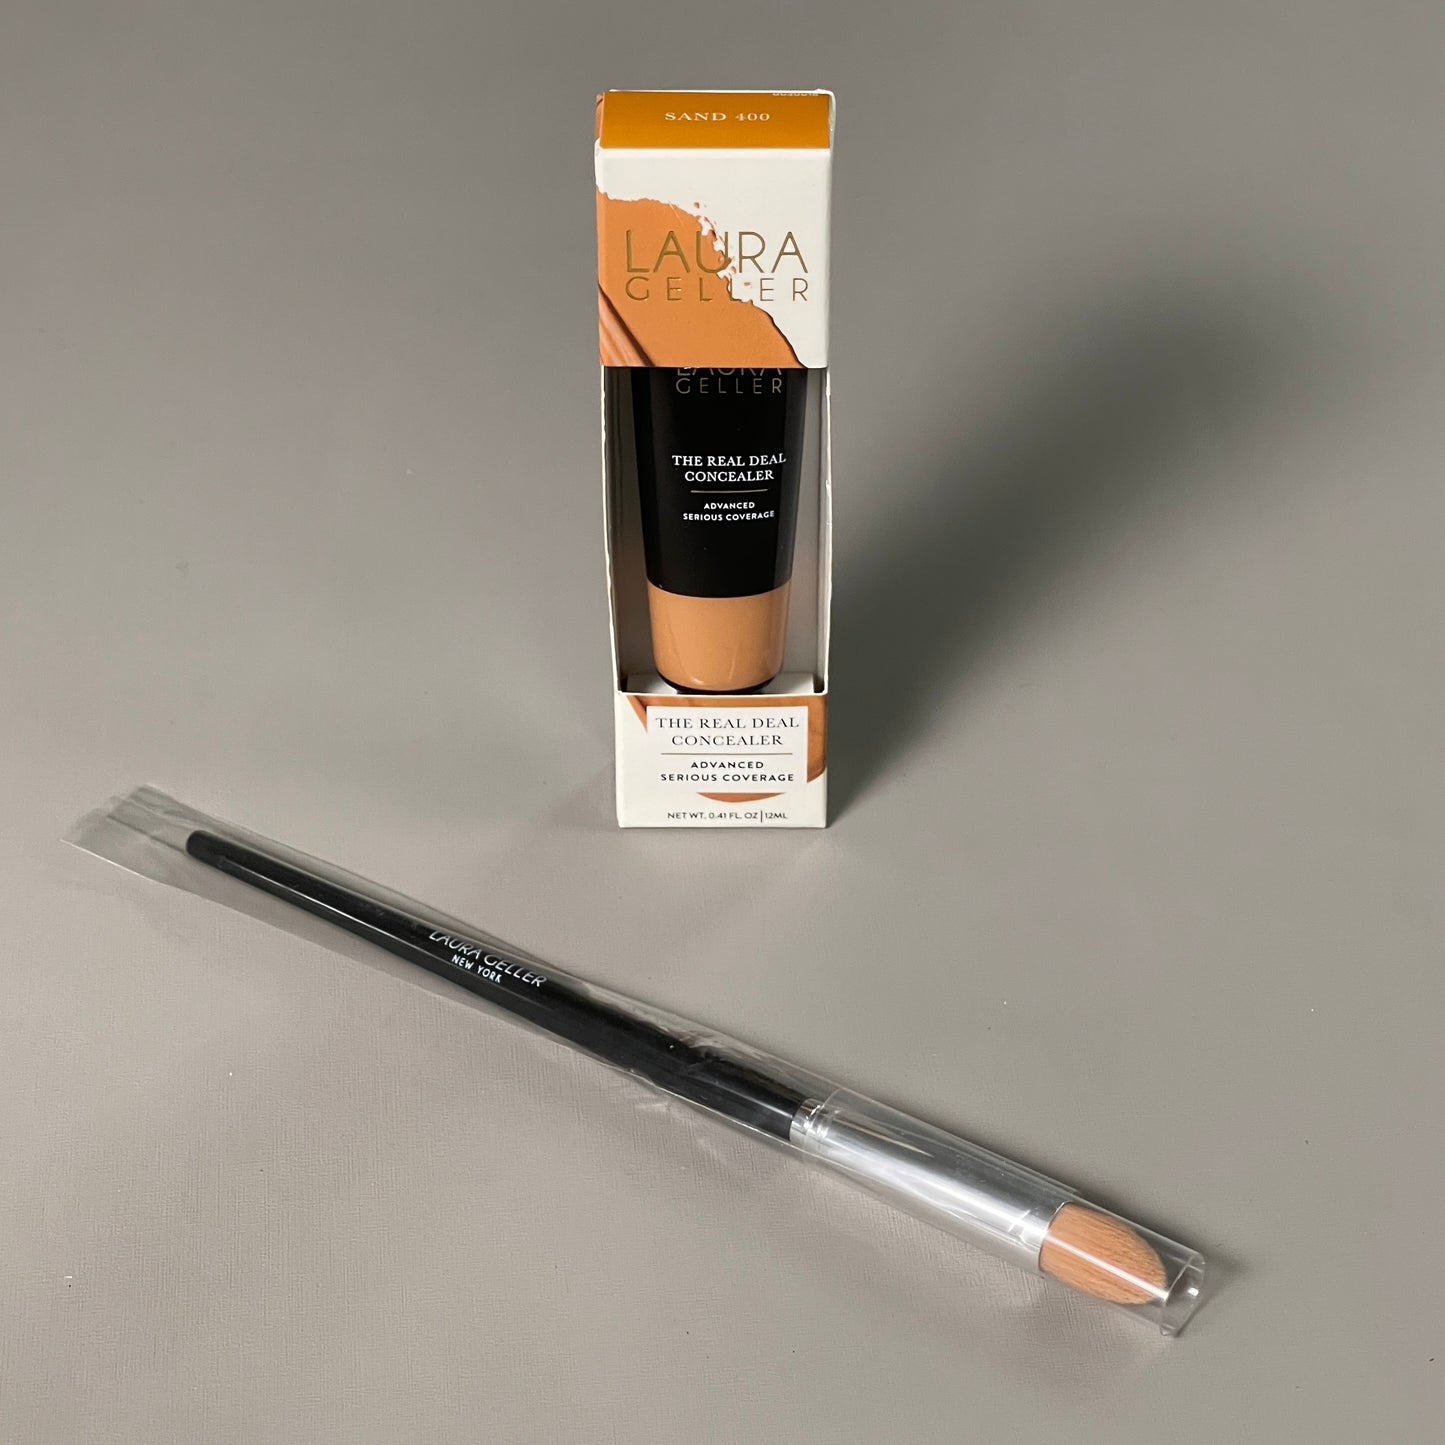 LAURA GELLER The Real Deal Concealer with Brush 0.41 fl oz Sand 400 (New)